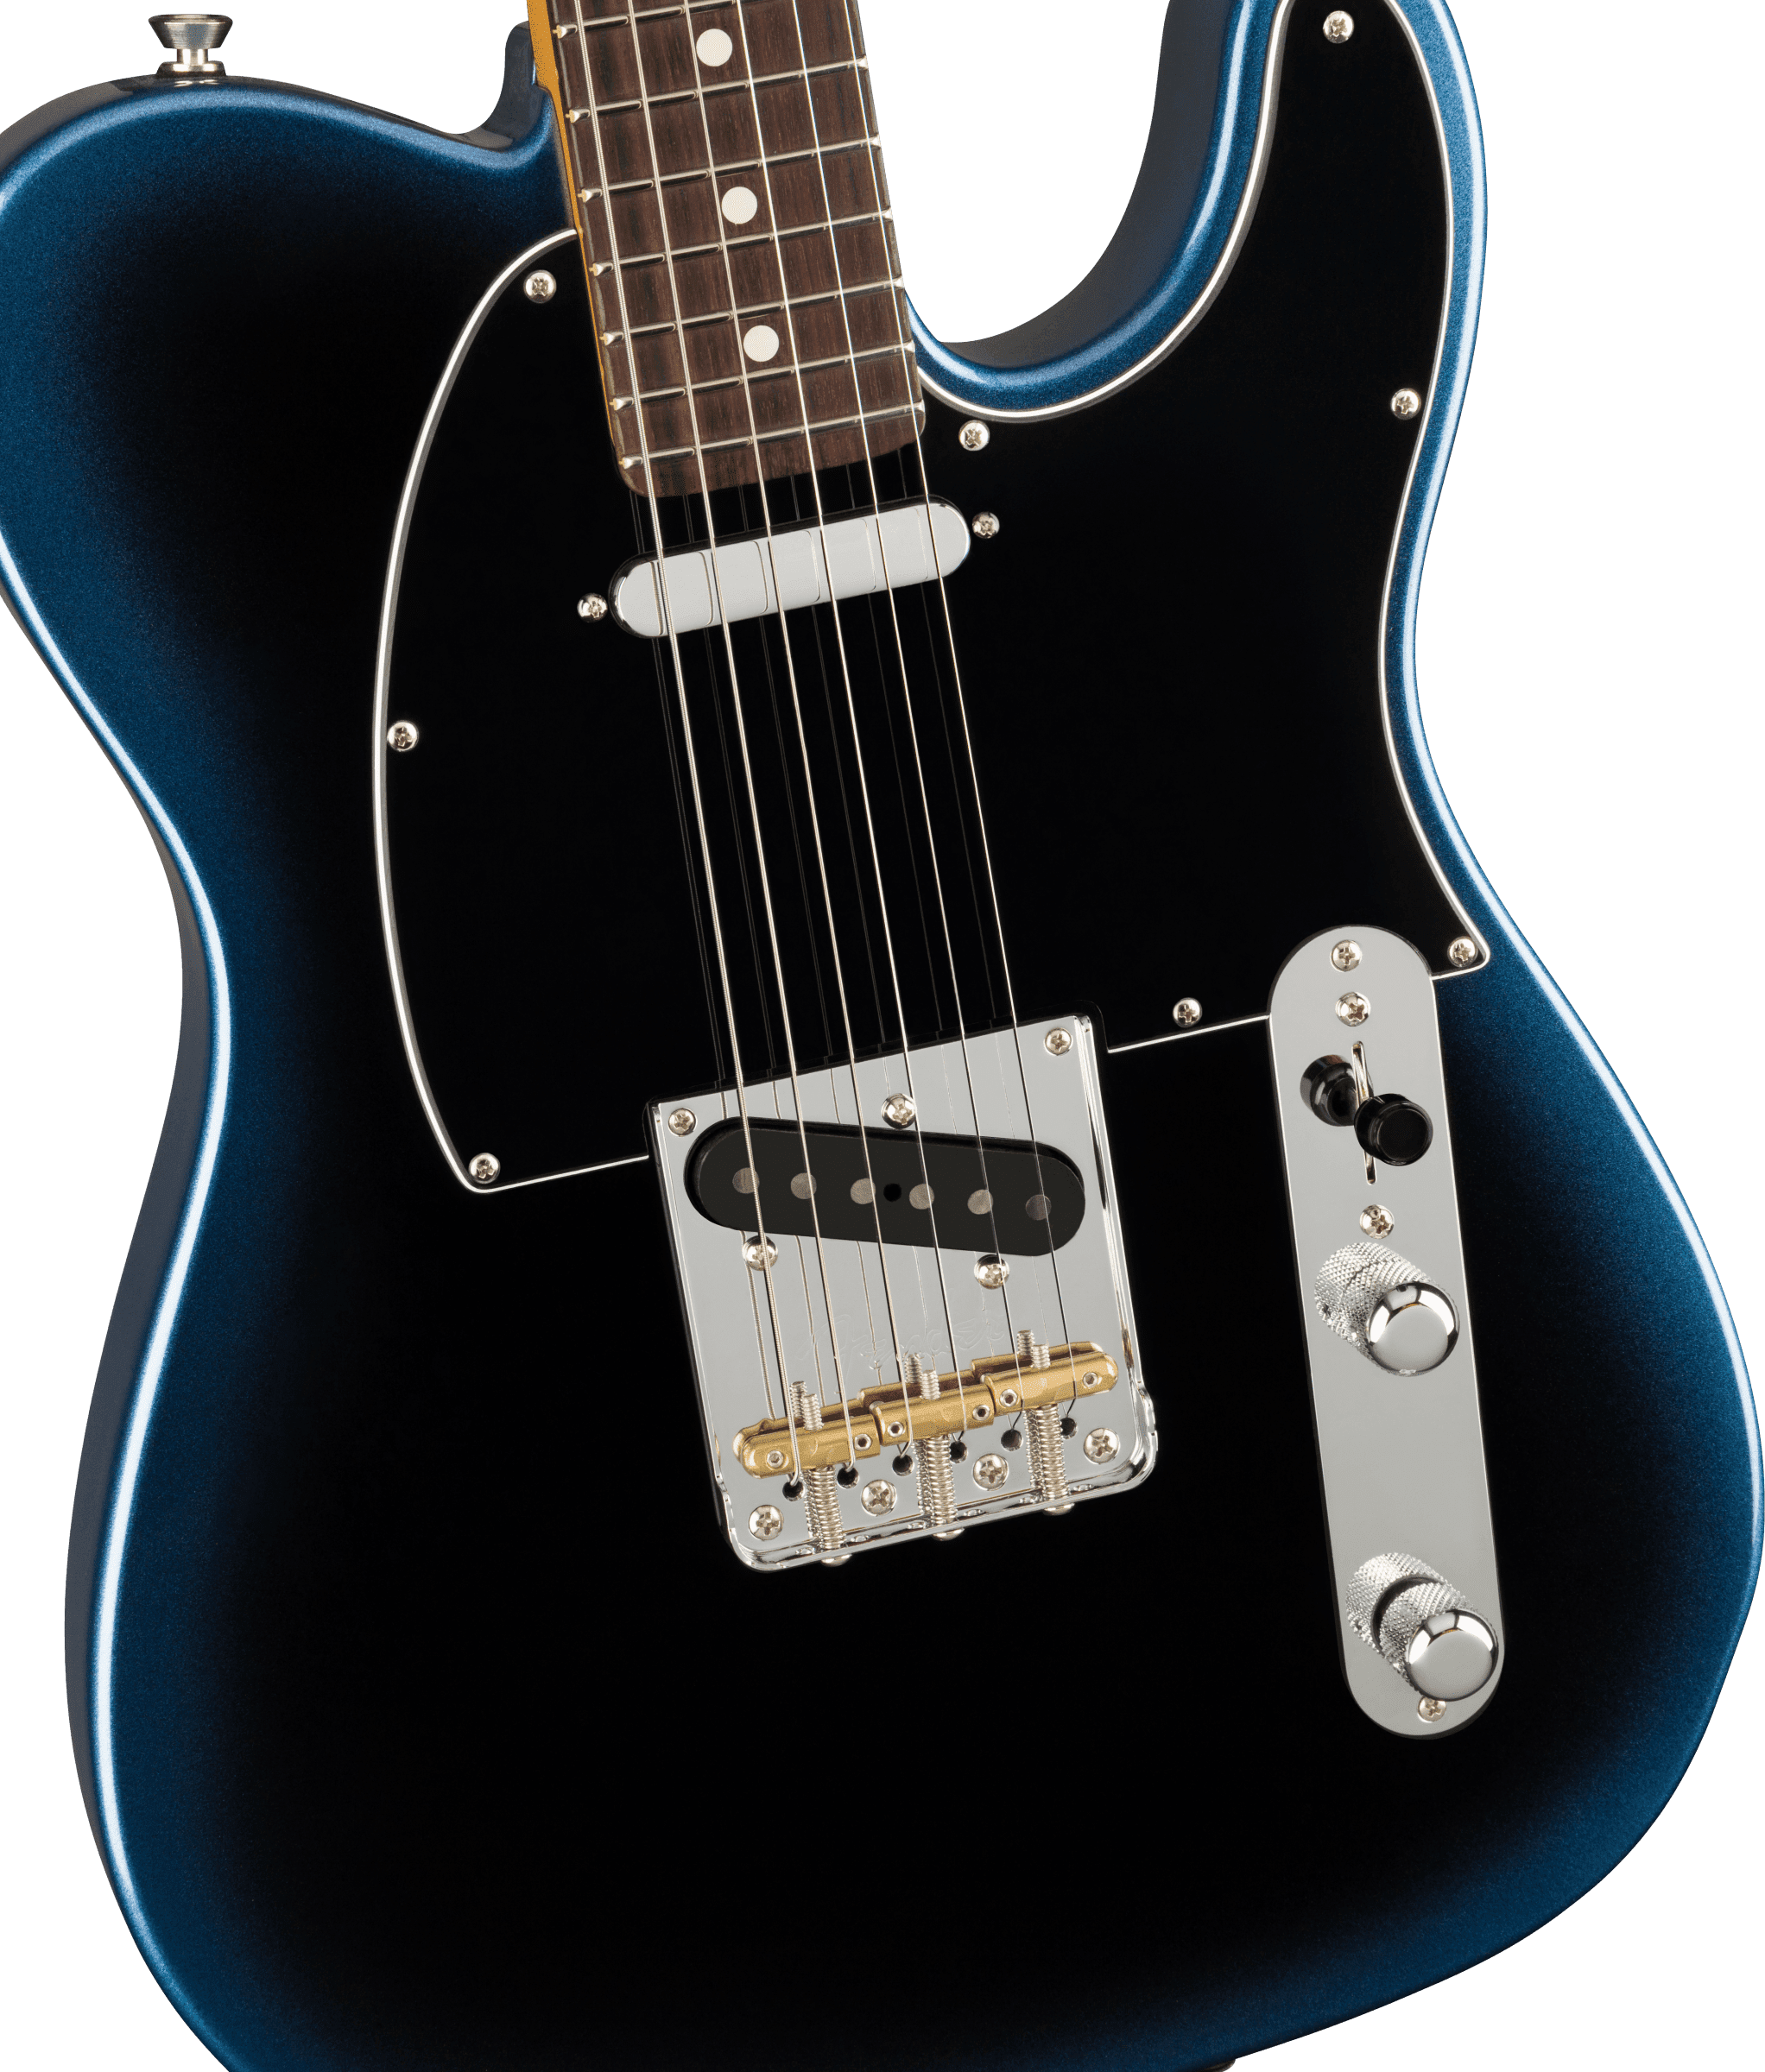 Body and controls on 6-string Fender American Professional II Telecaster® Electric Guitar in Dark Knight blue close-up